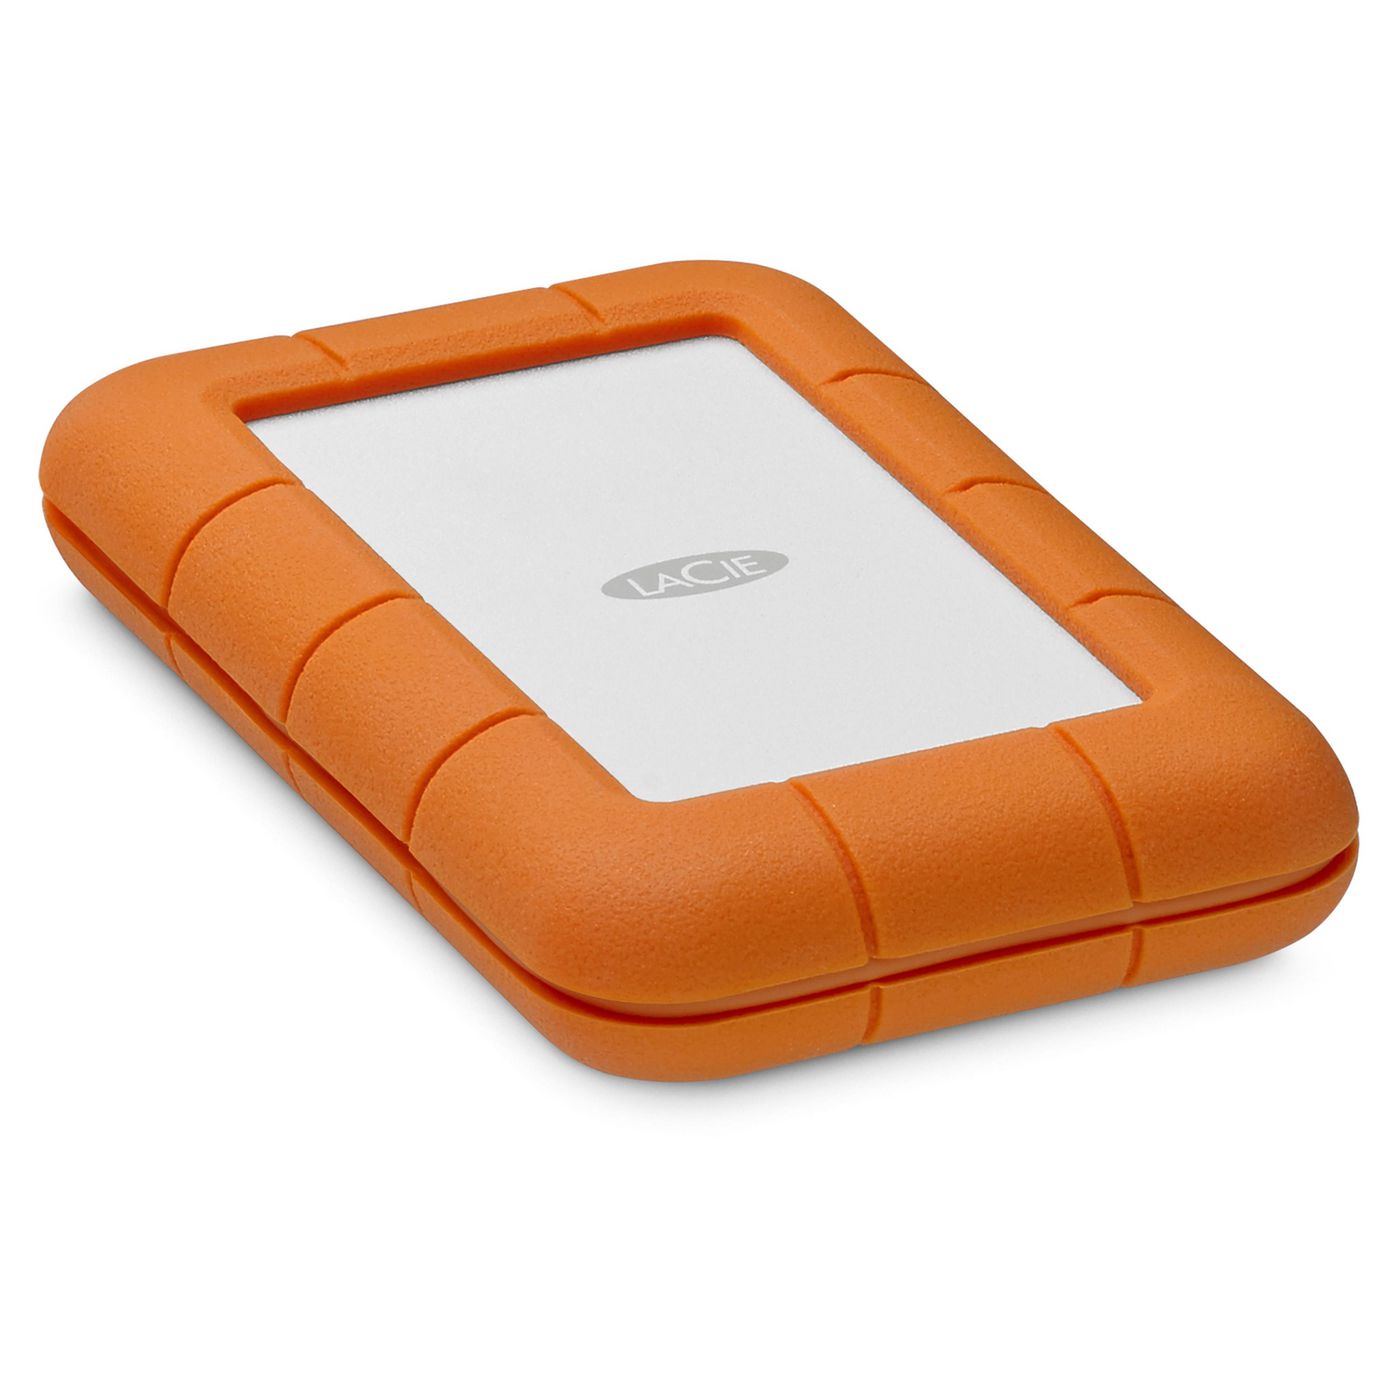 LACIE STFR2000403 W128320894 Rugged Secure External Hard 